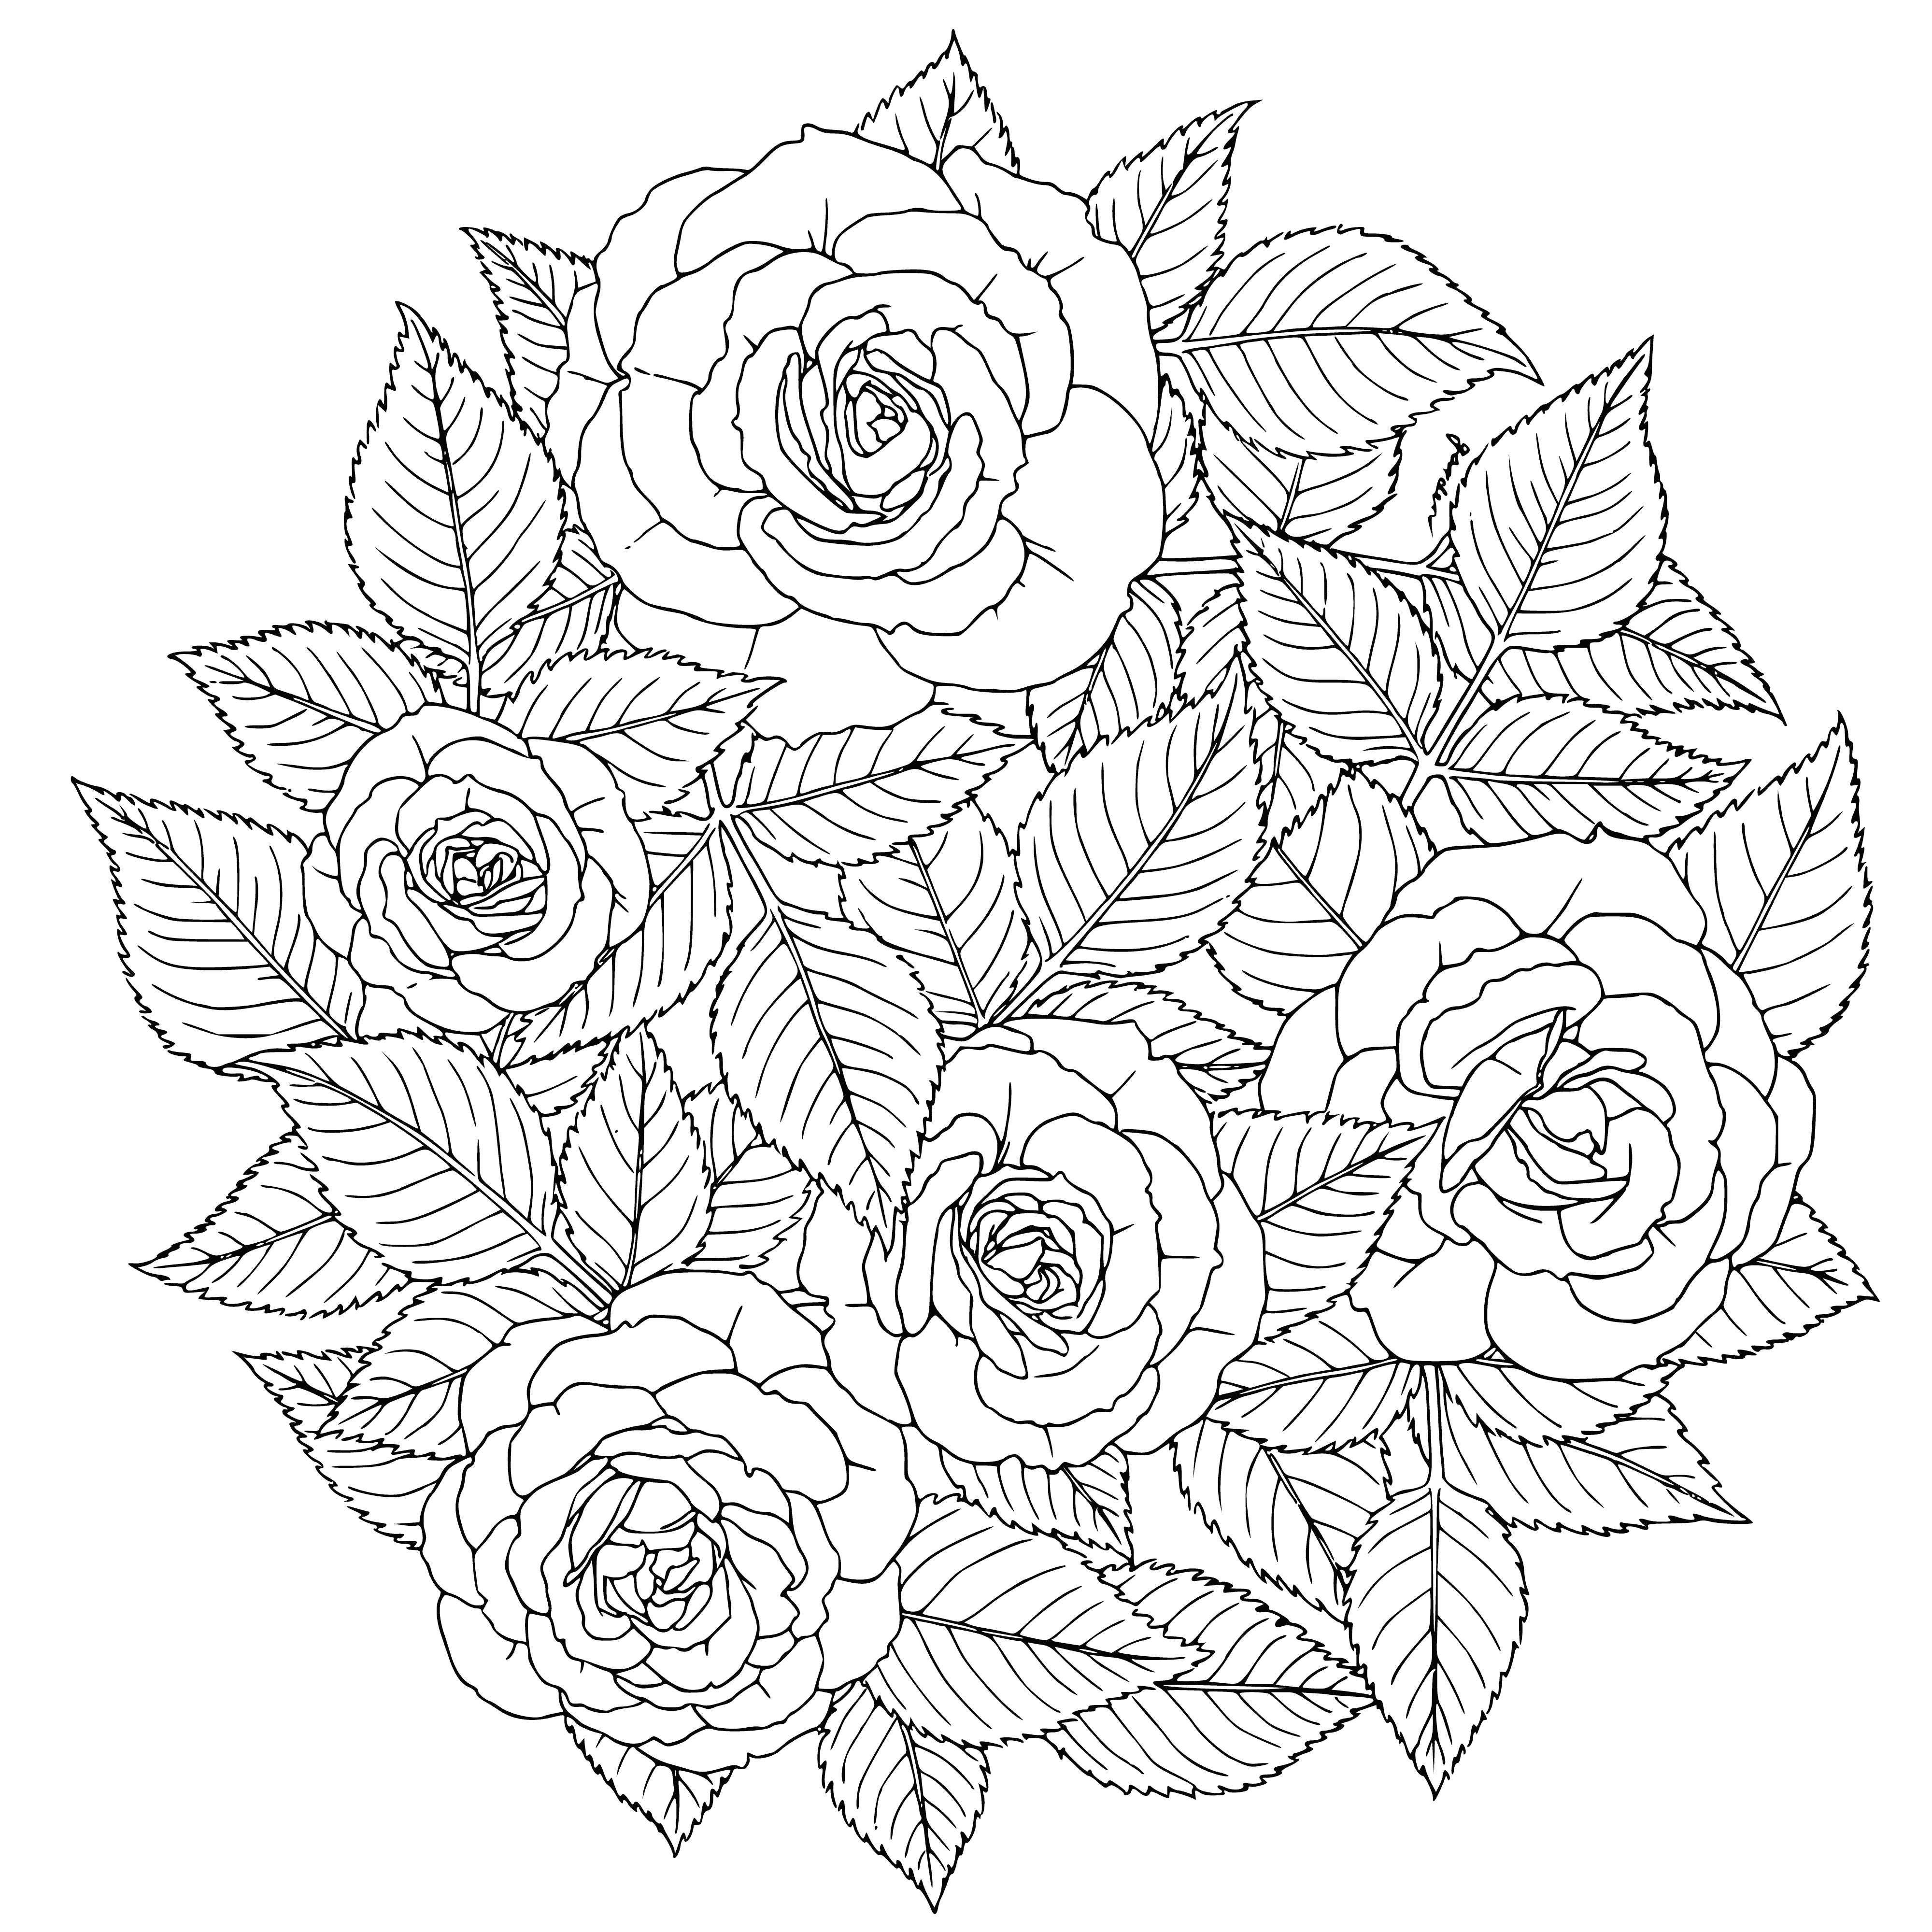 coloring page: Coloring page of a big bouquet of roses in shades of pink and red, with a single white rose in the center and intertwining vines and leaves.